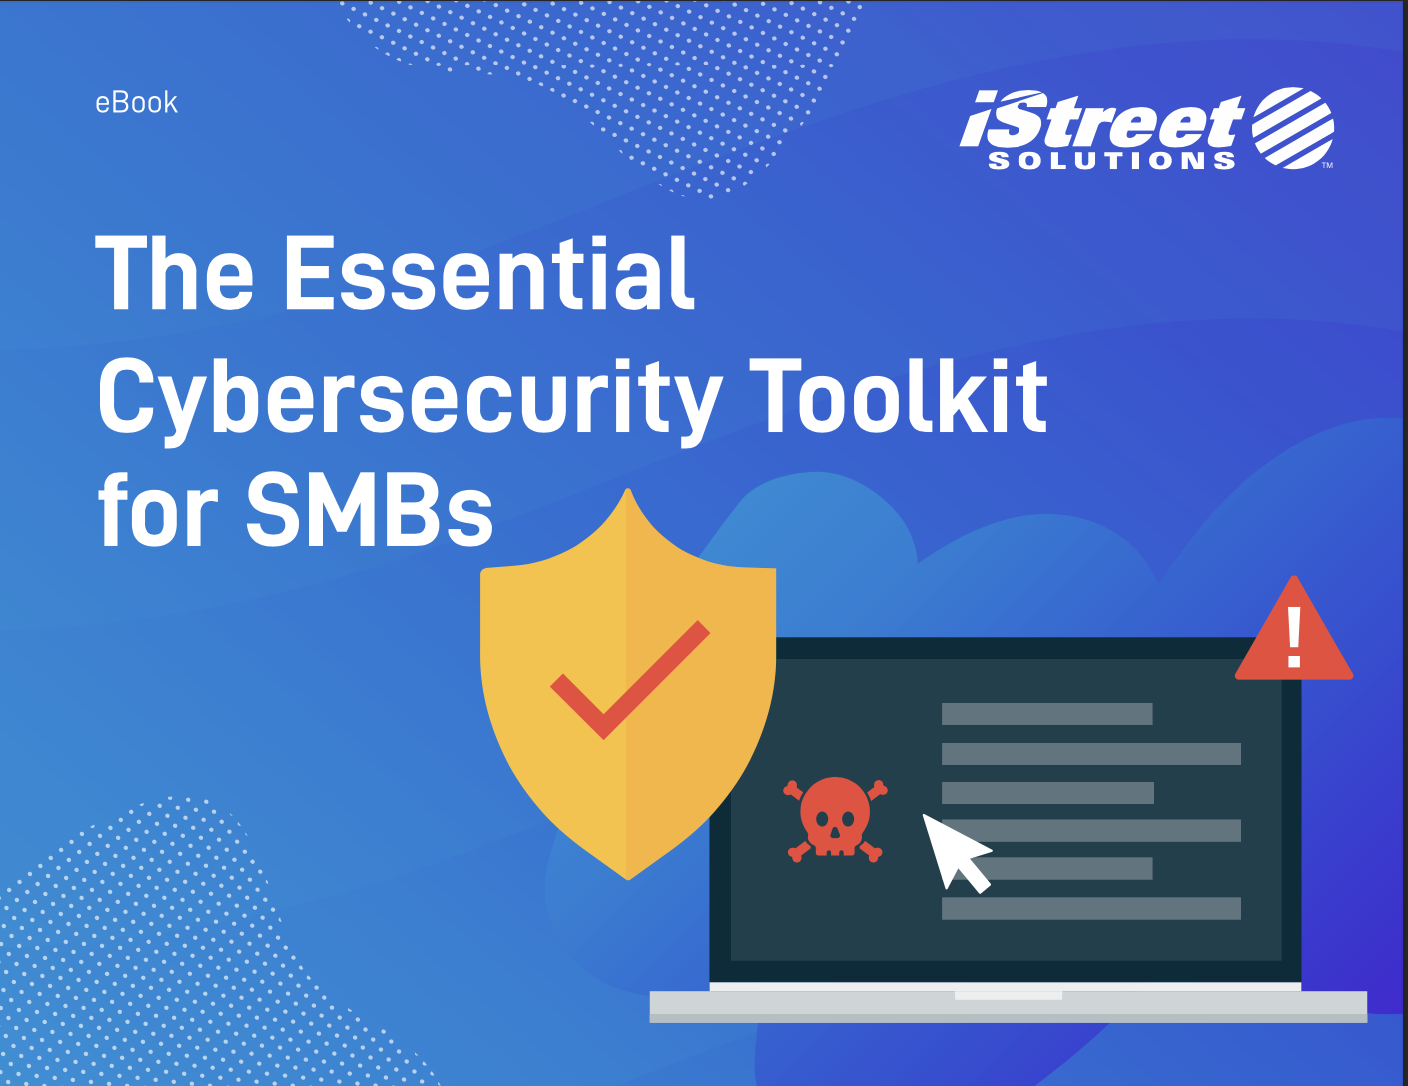 The Essential Cybersecurity Toolkit for SMBs